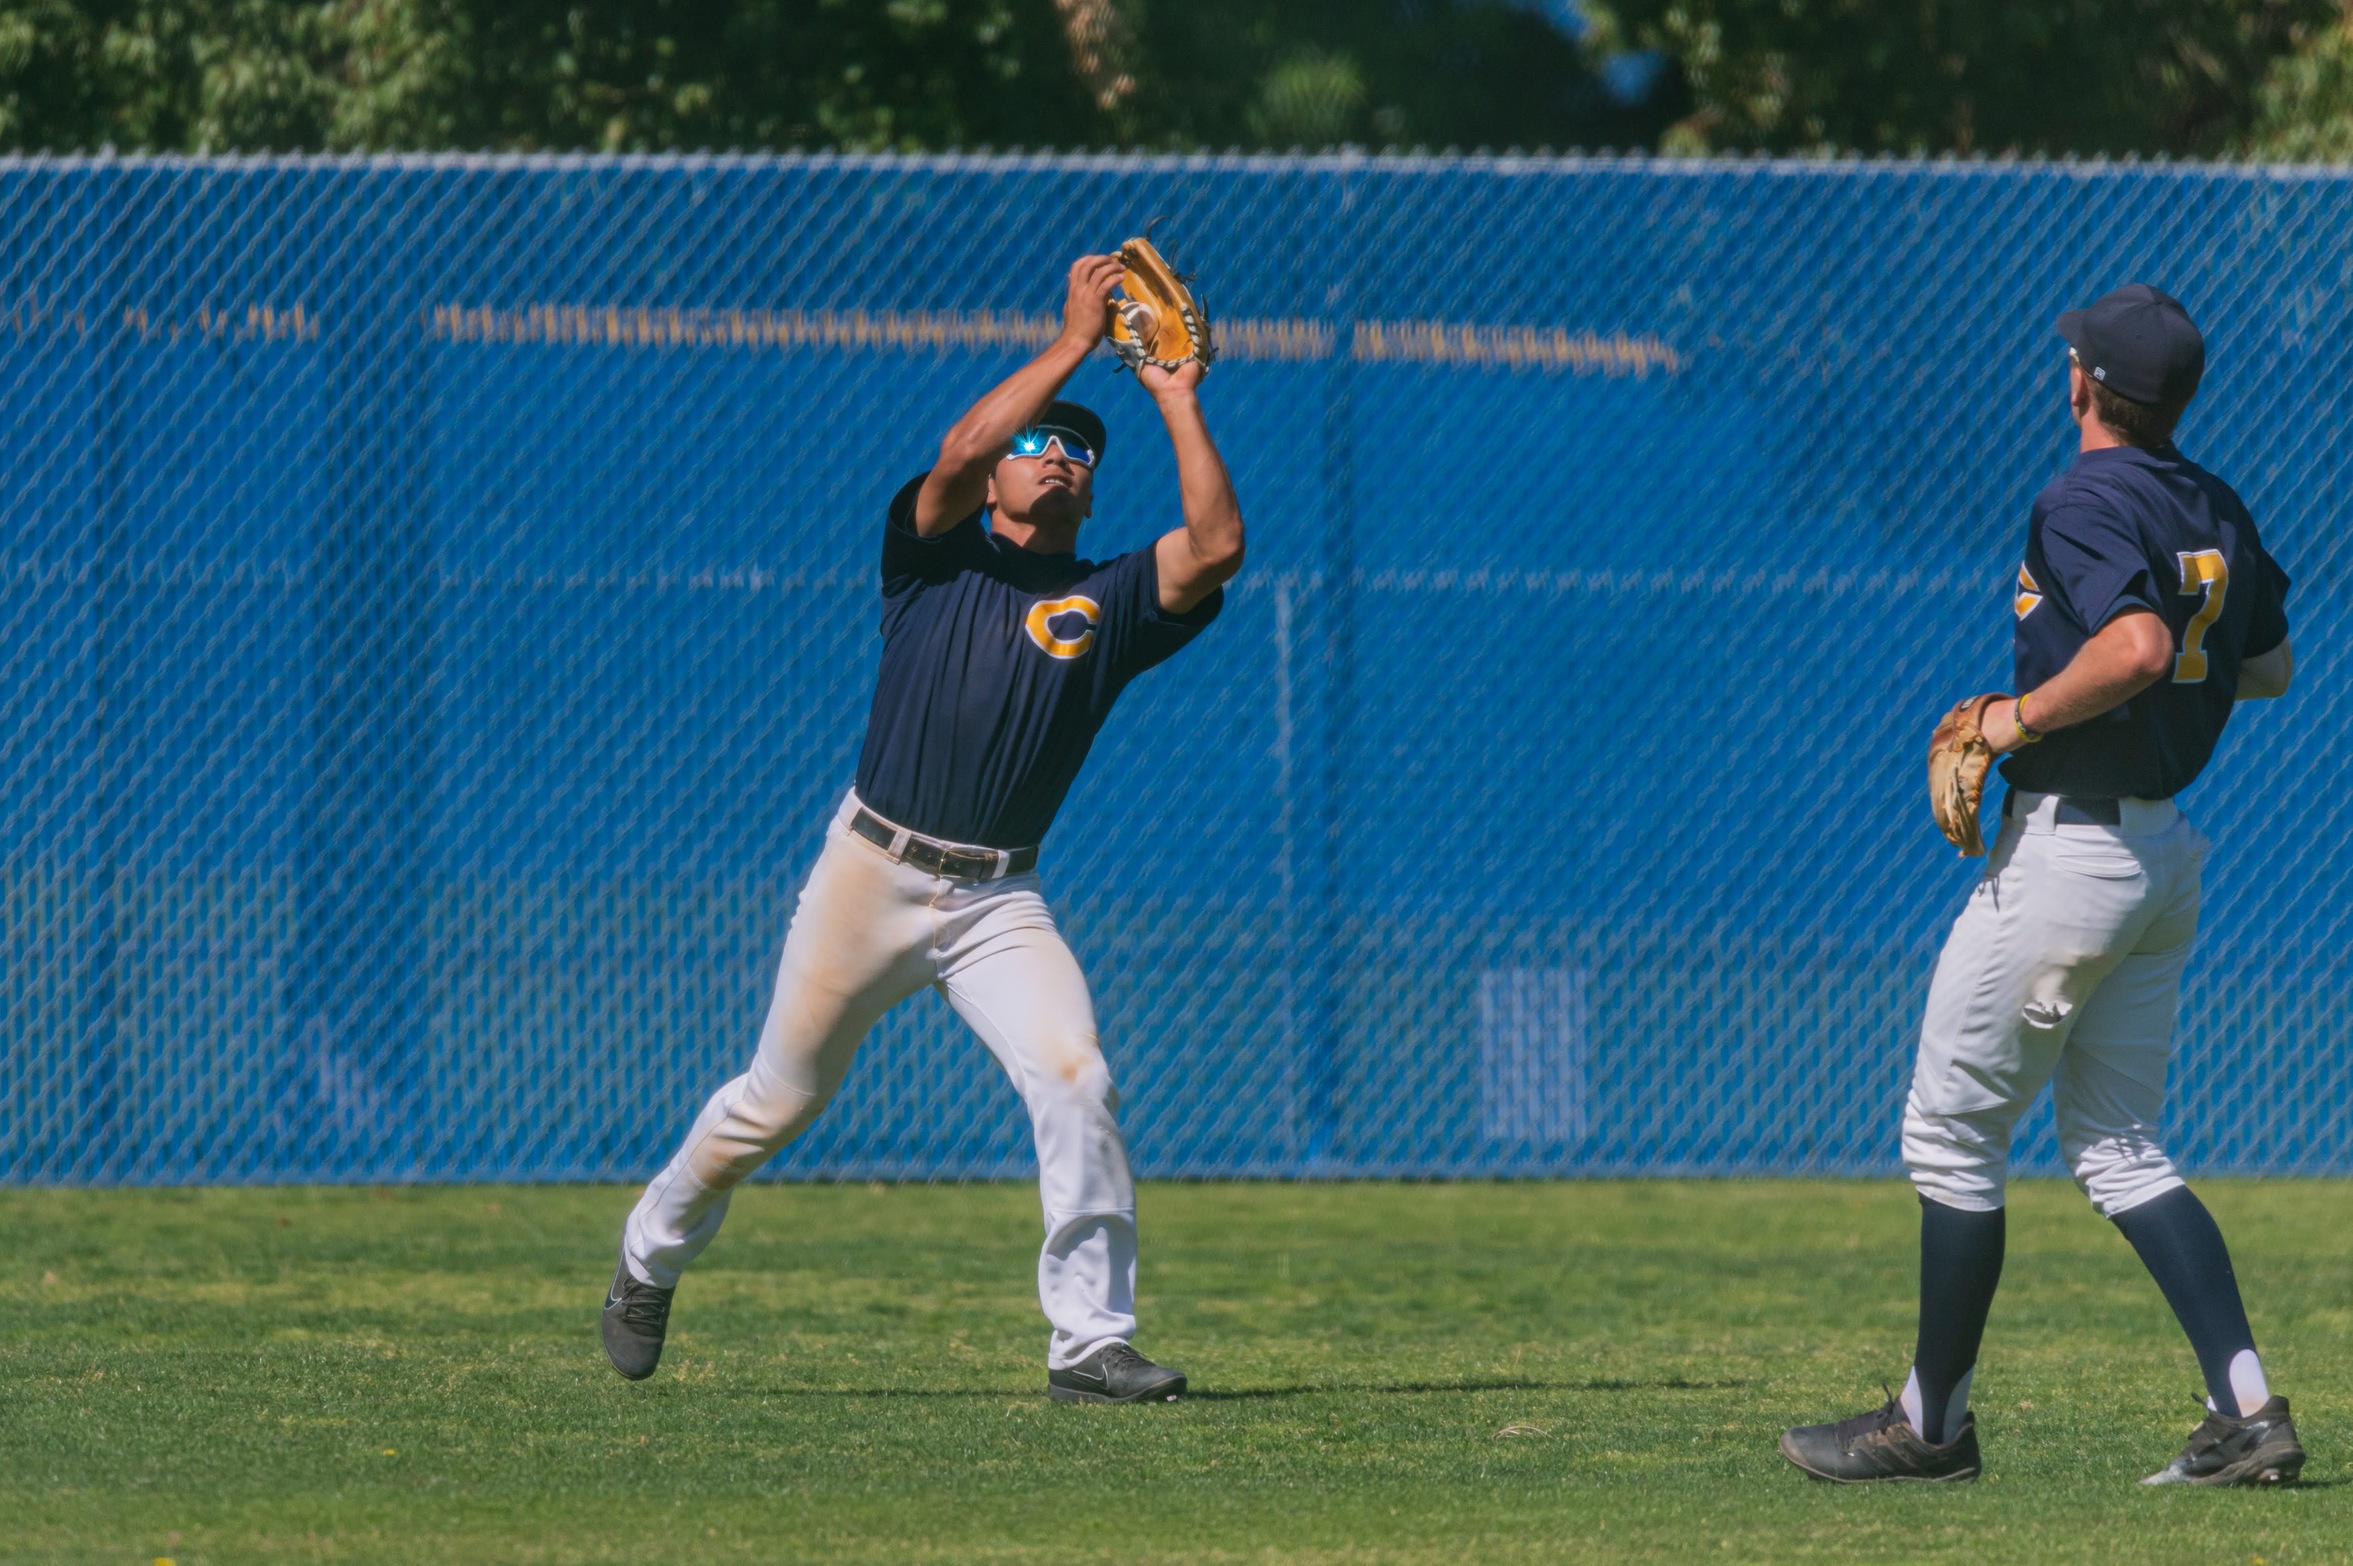 College of the Canyons baseball stock image.